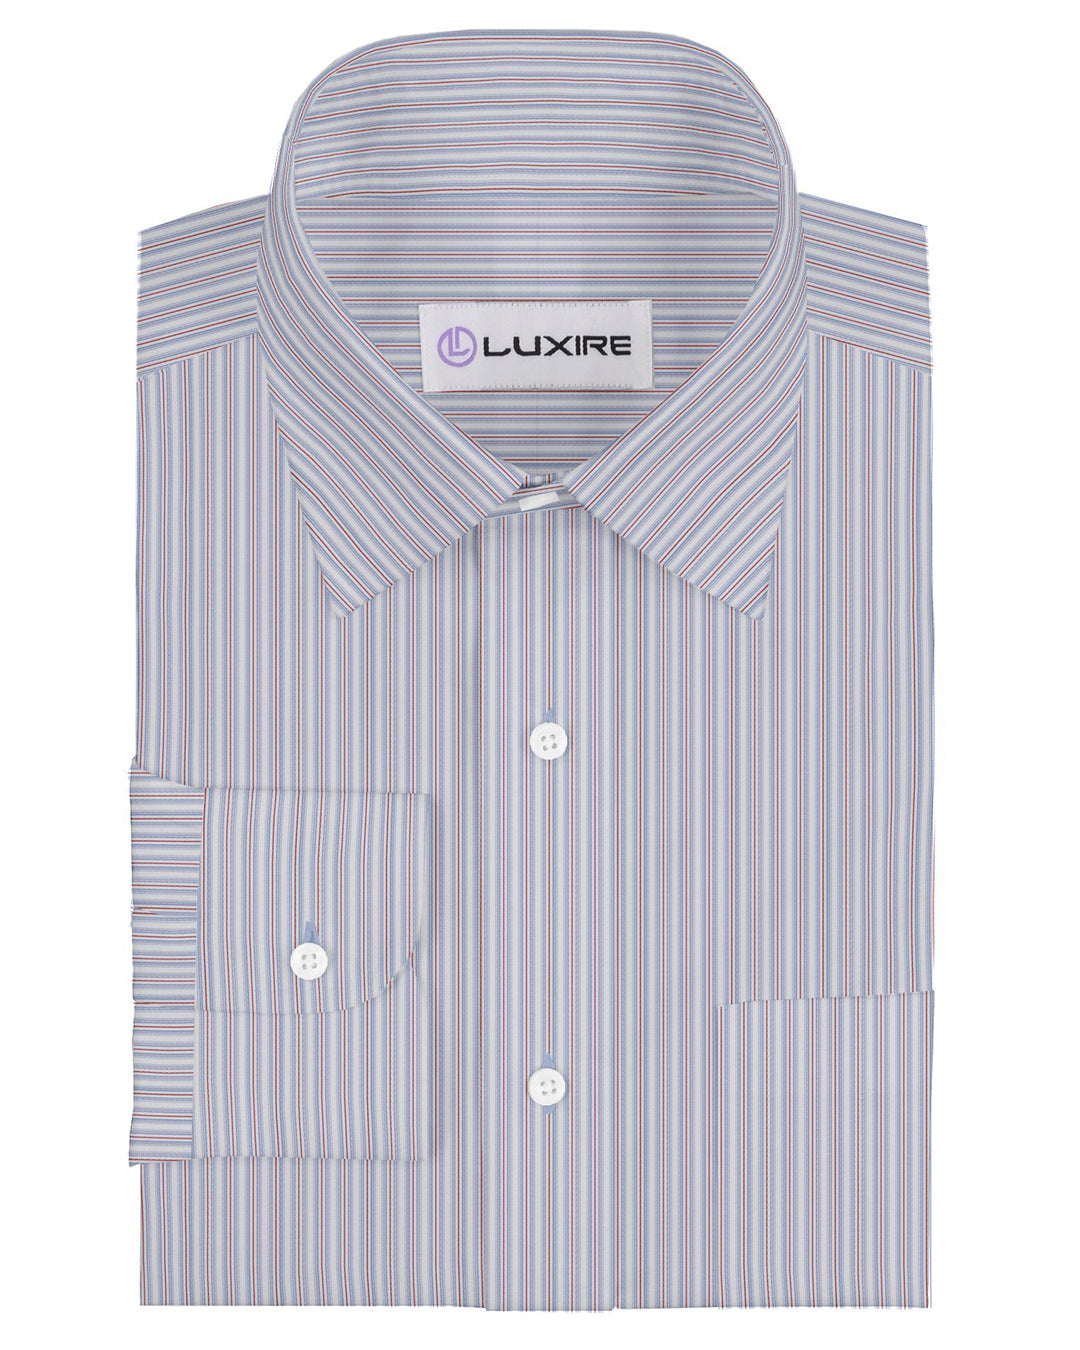 Front of the custom linen shirt for men in grey with blue and red stripes by Luxire Clothing